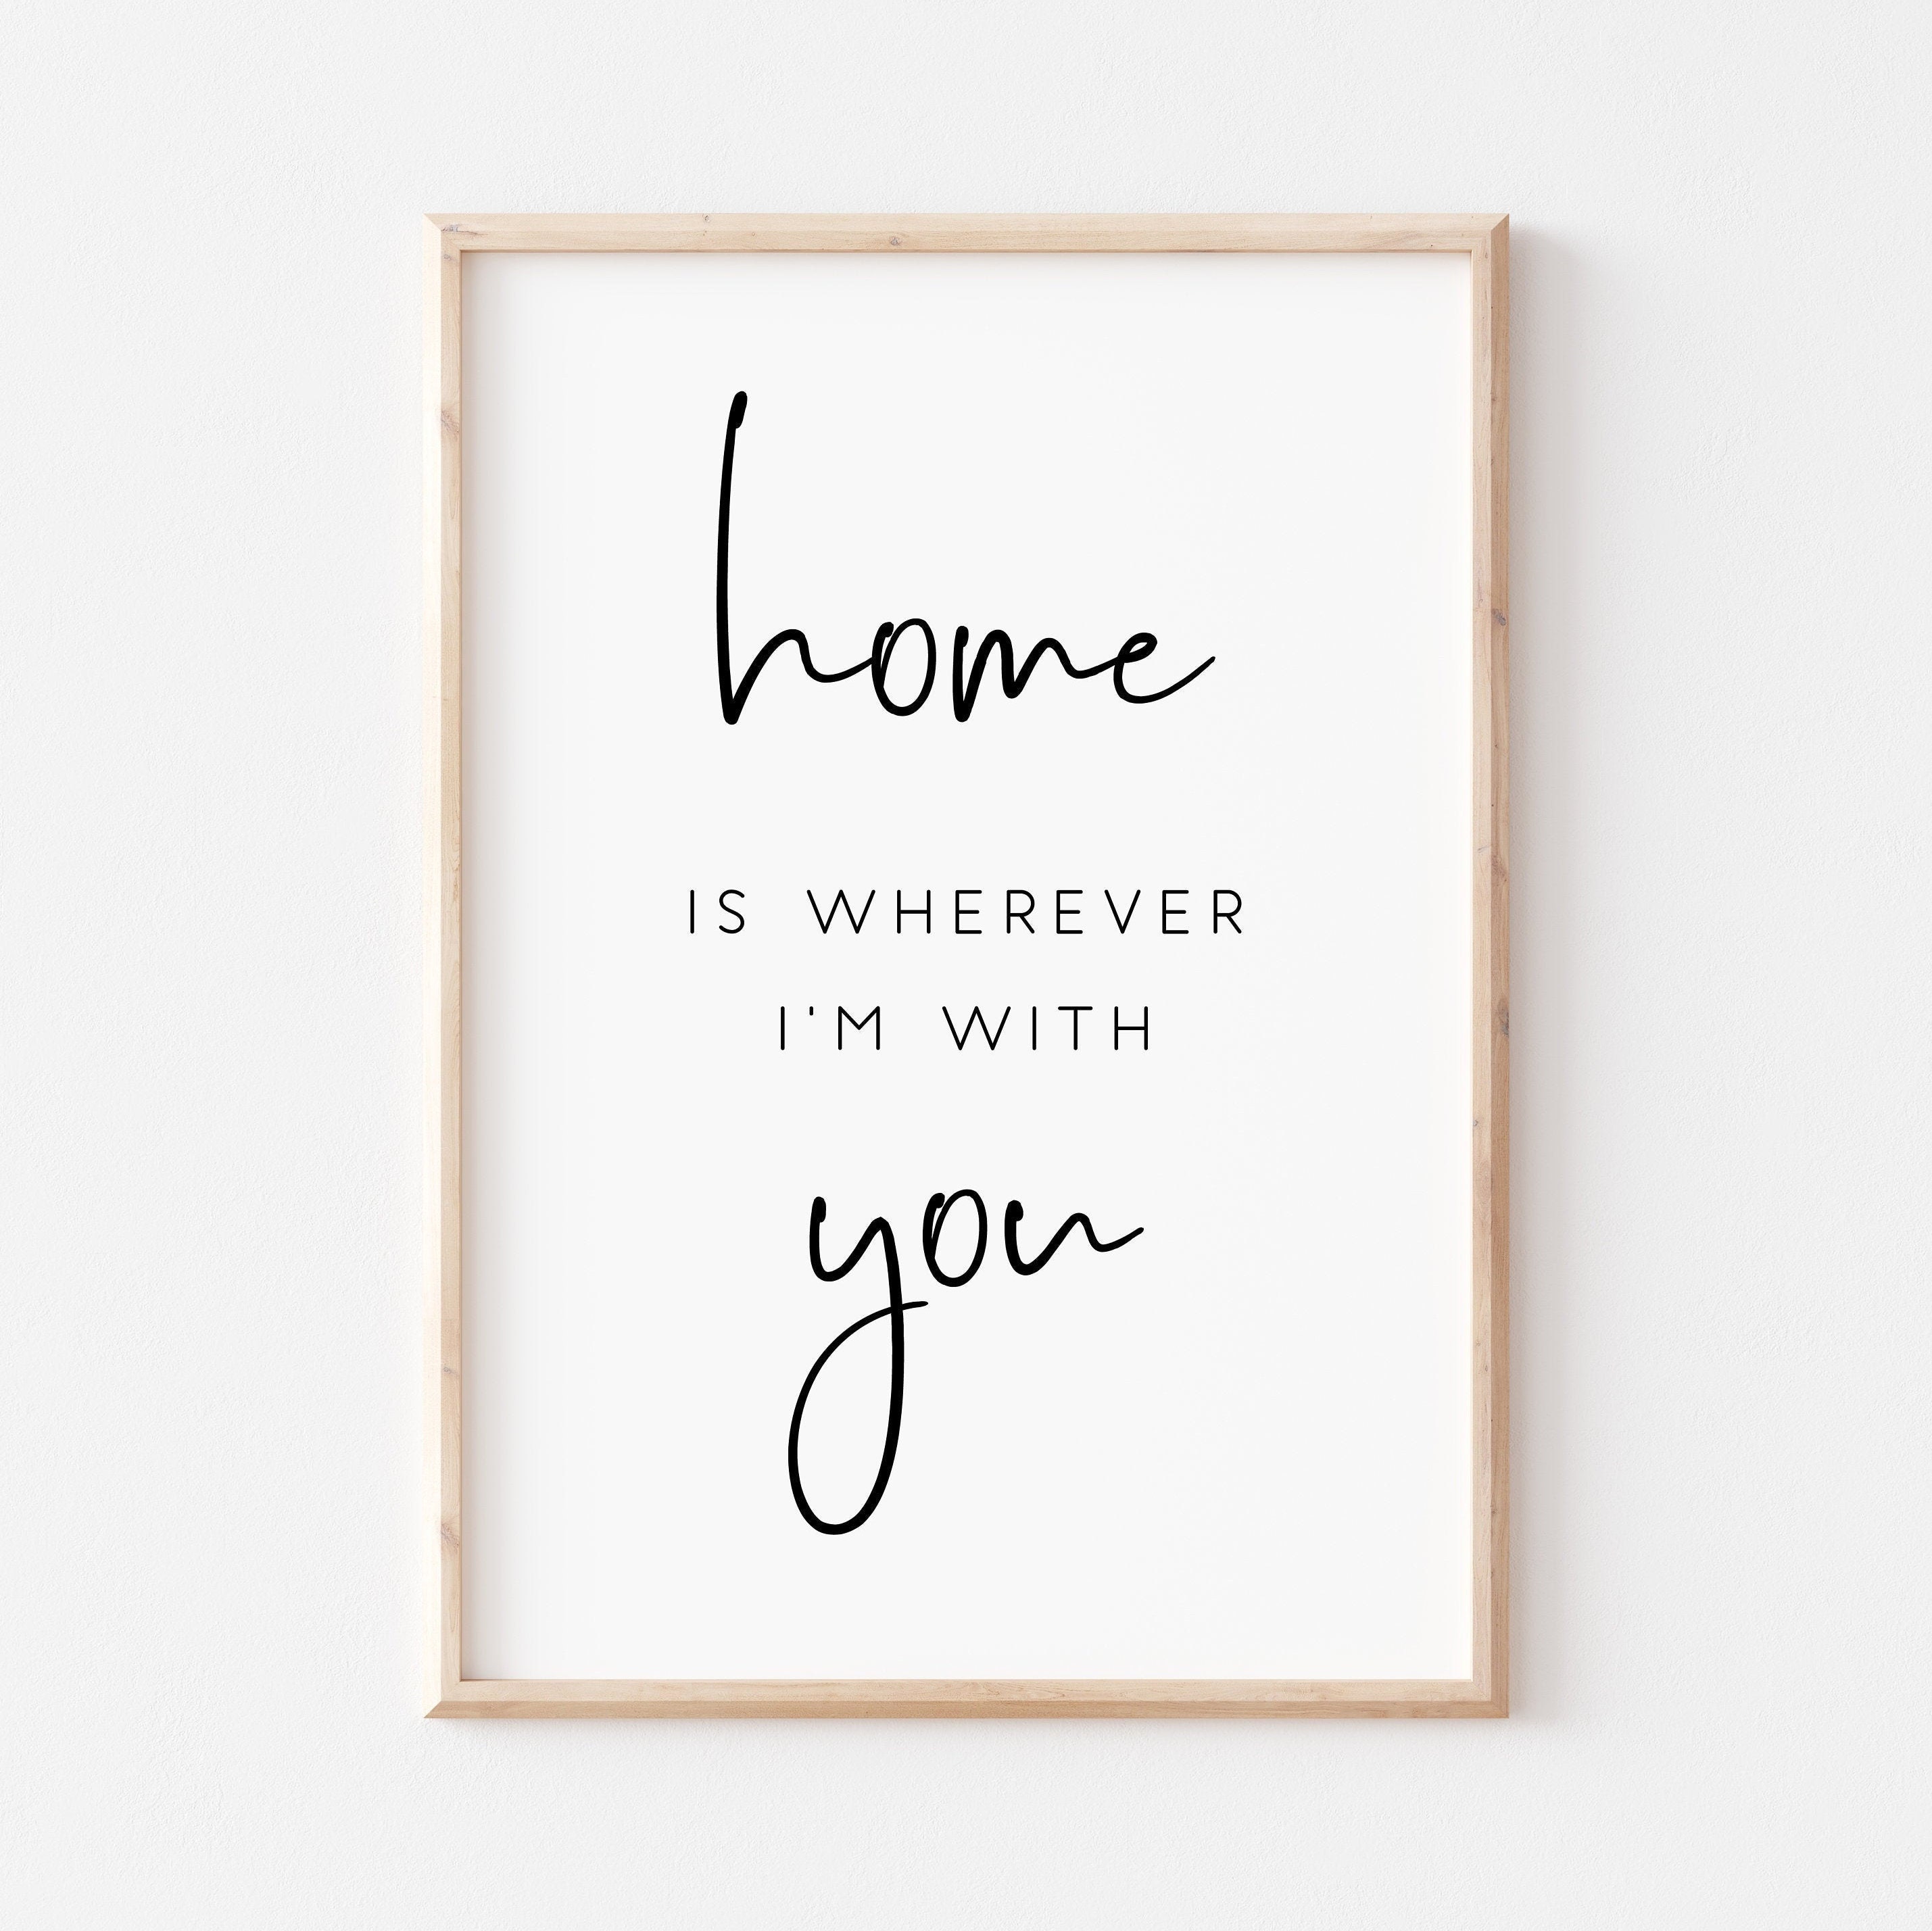 Home Let me come home. Home is wherever I'm with you. - Post by